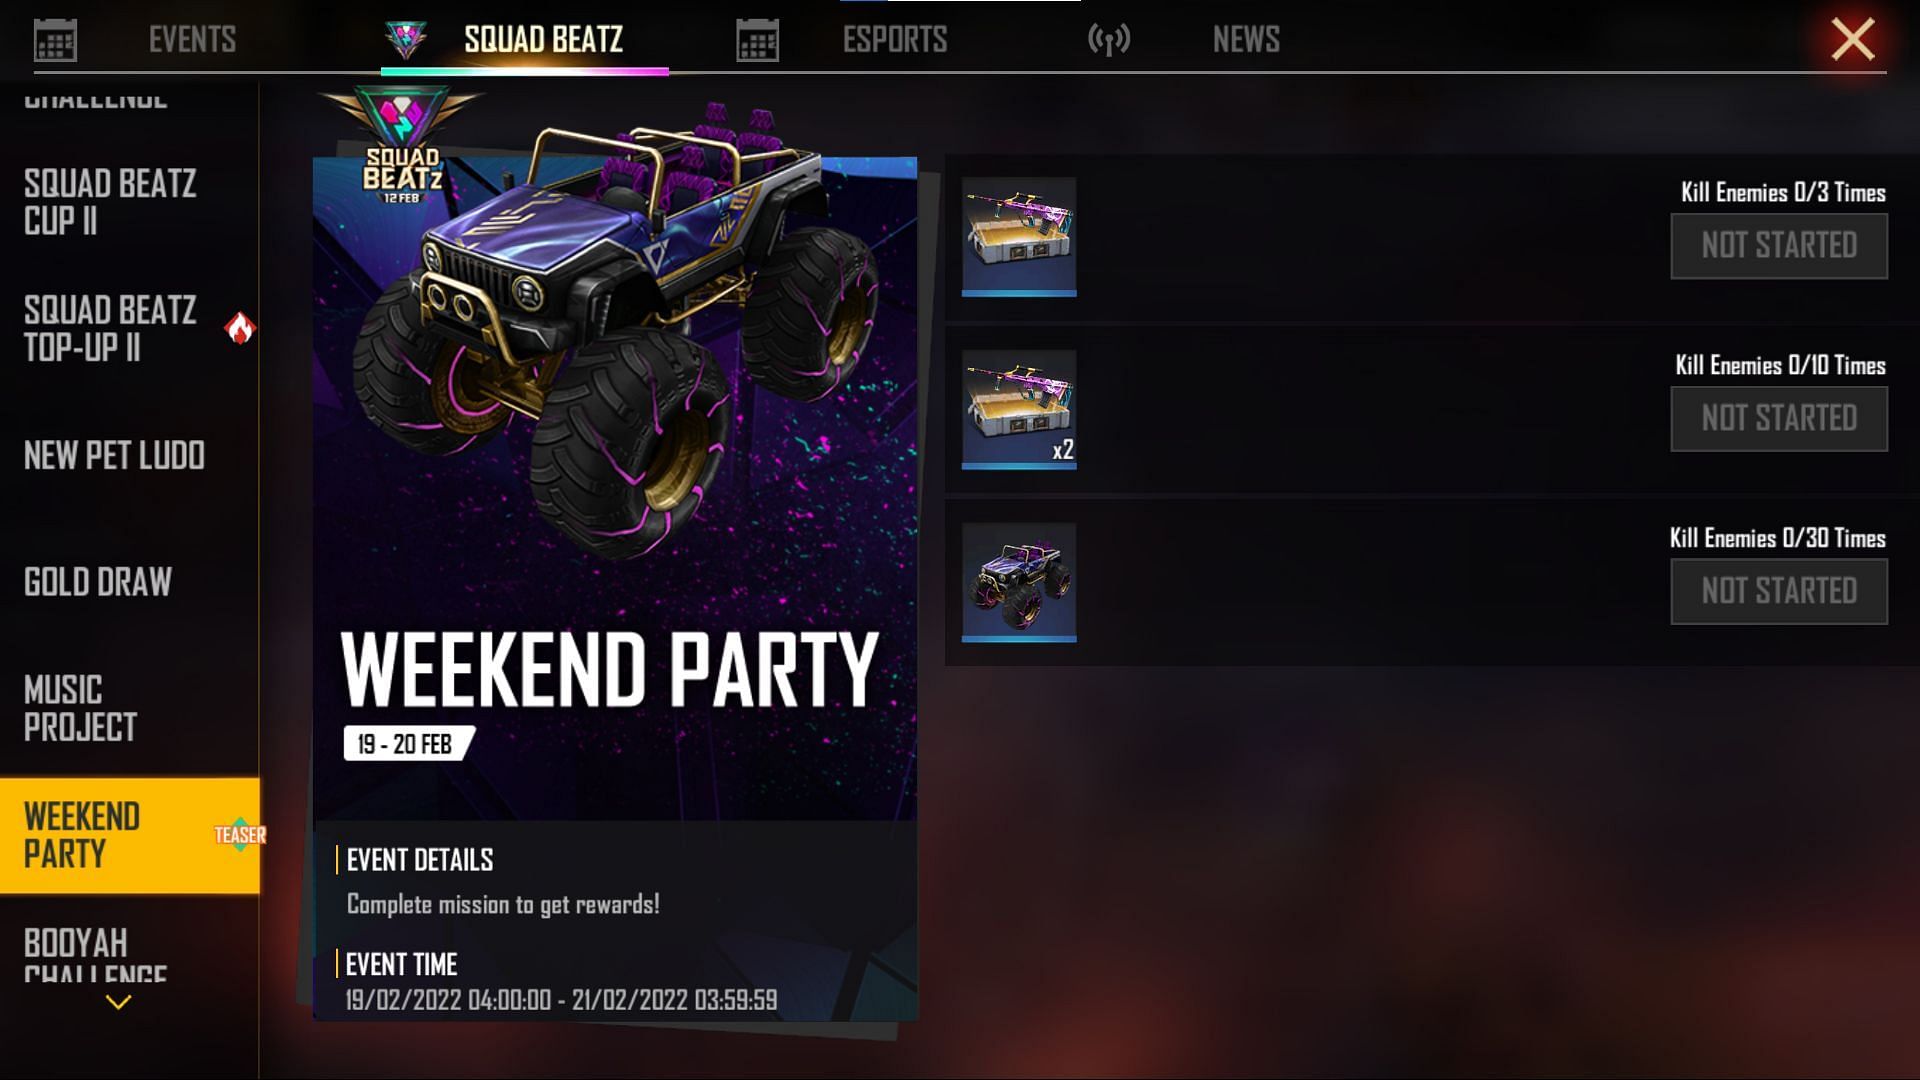 The Weekend Party event (Image via Garena)